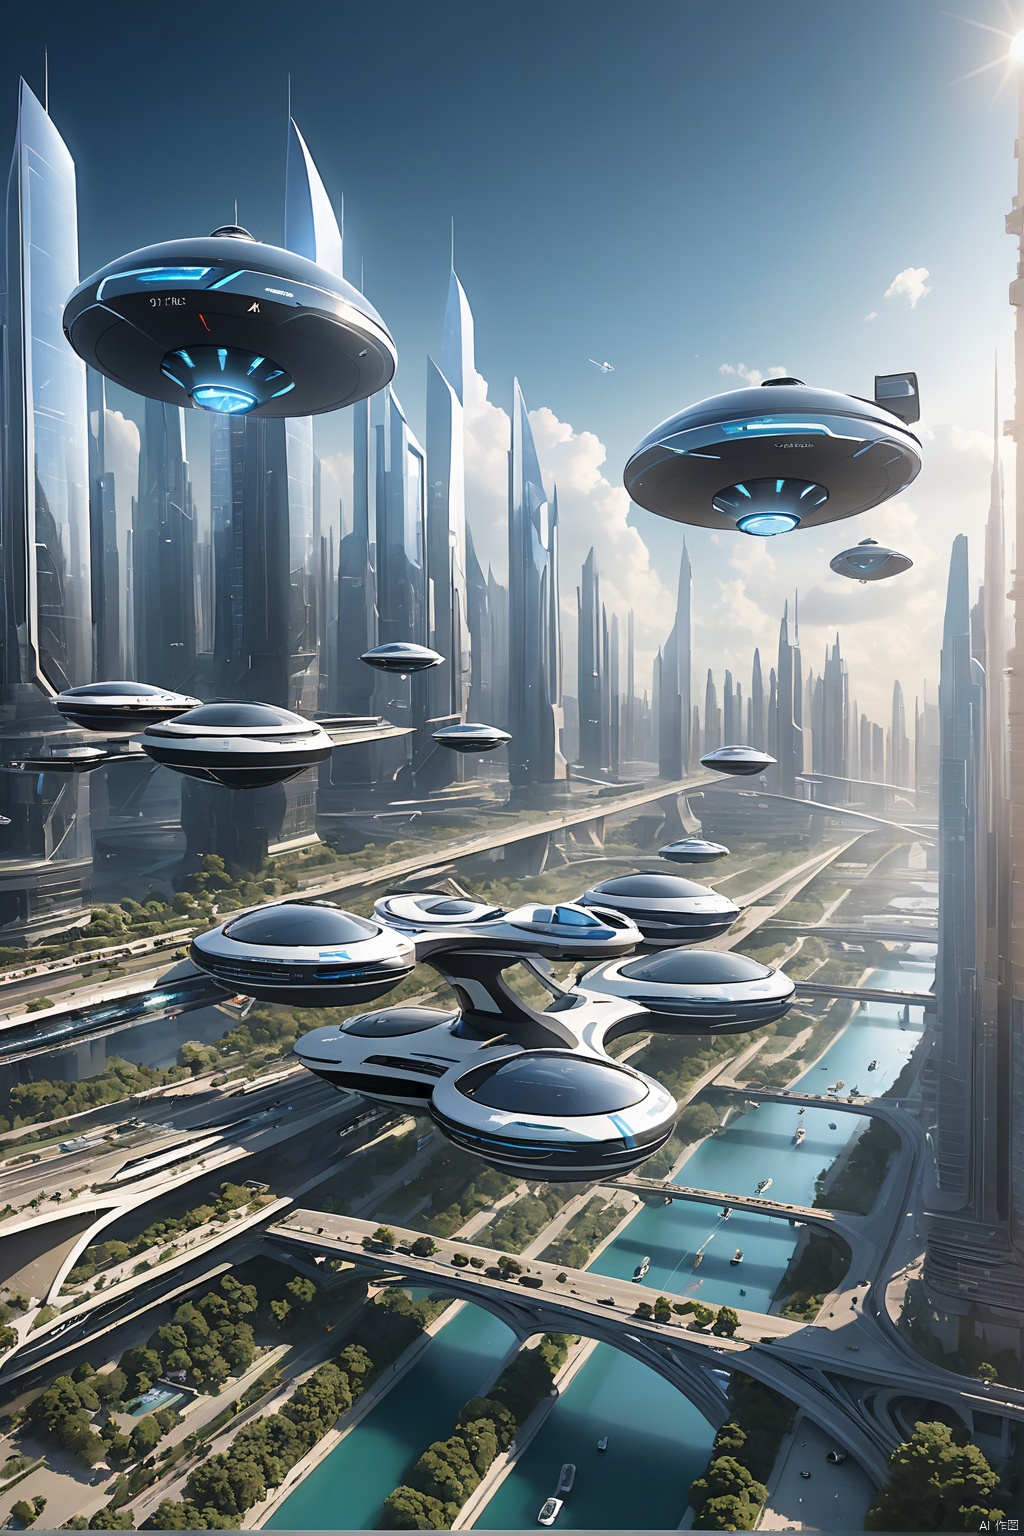  Imagine a futuristic city with several flying cars